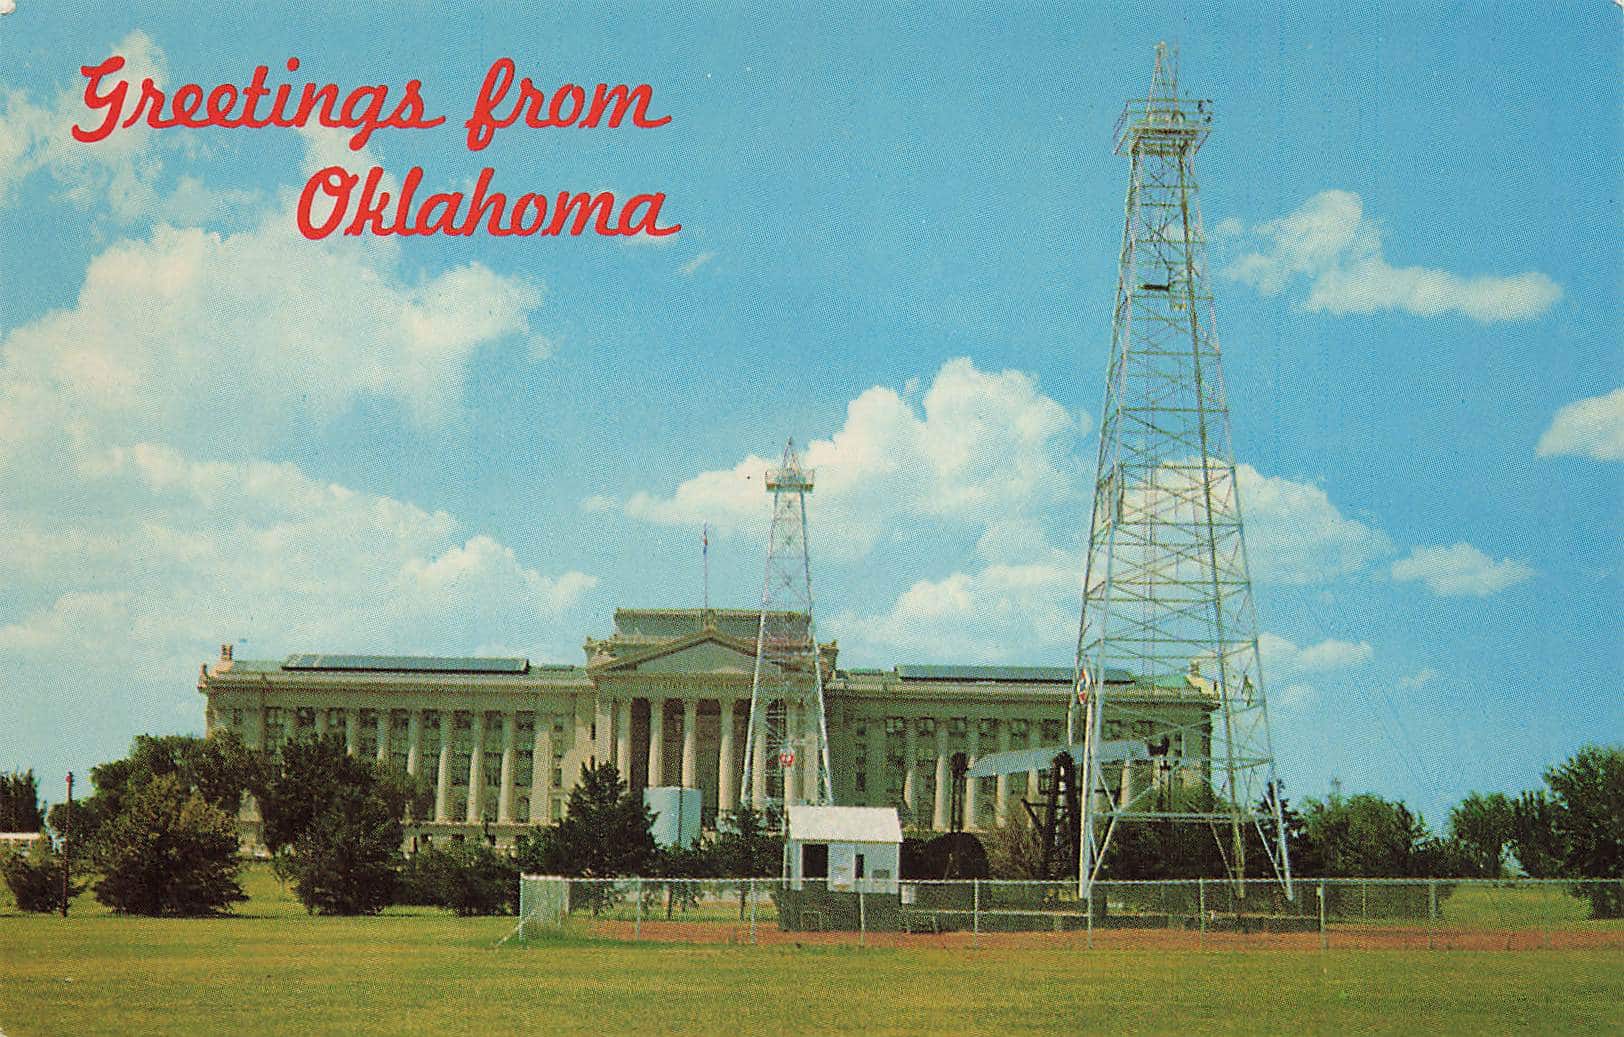 Another postcard showing the state capitol oil derricks.